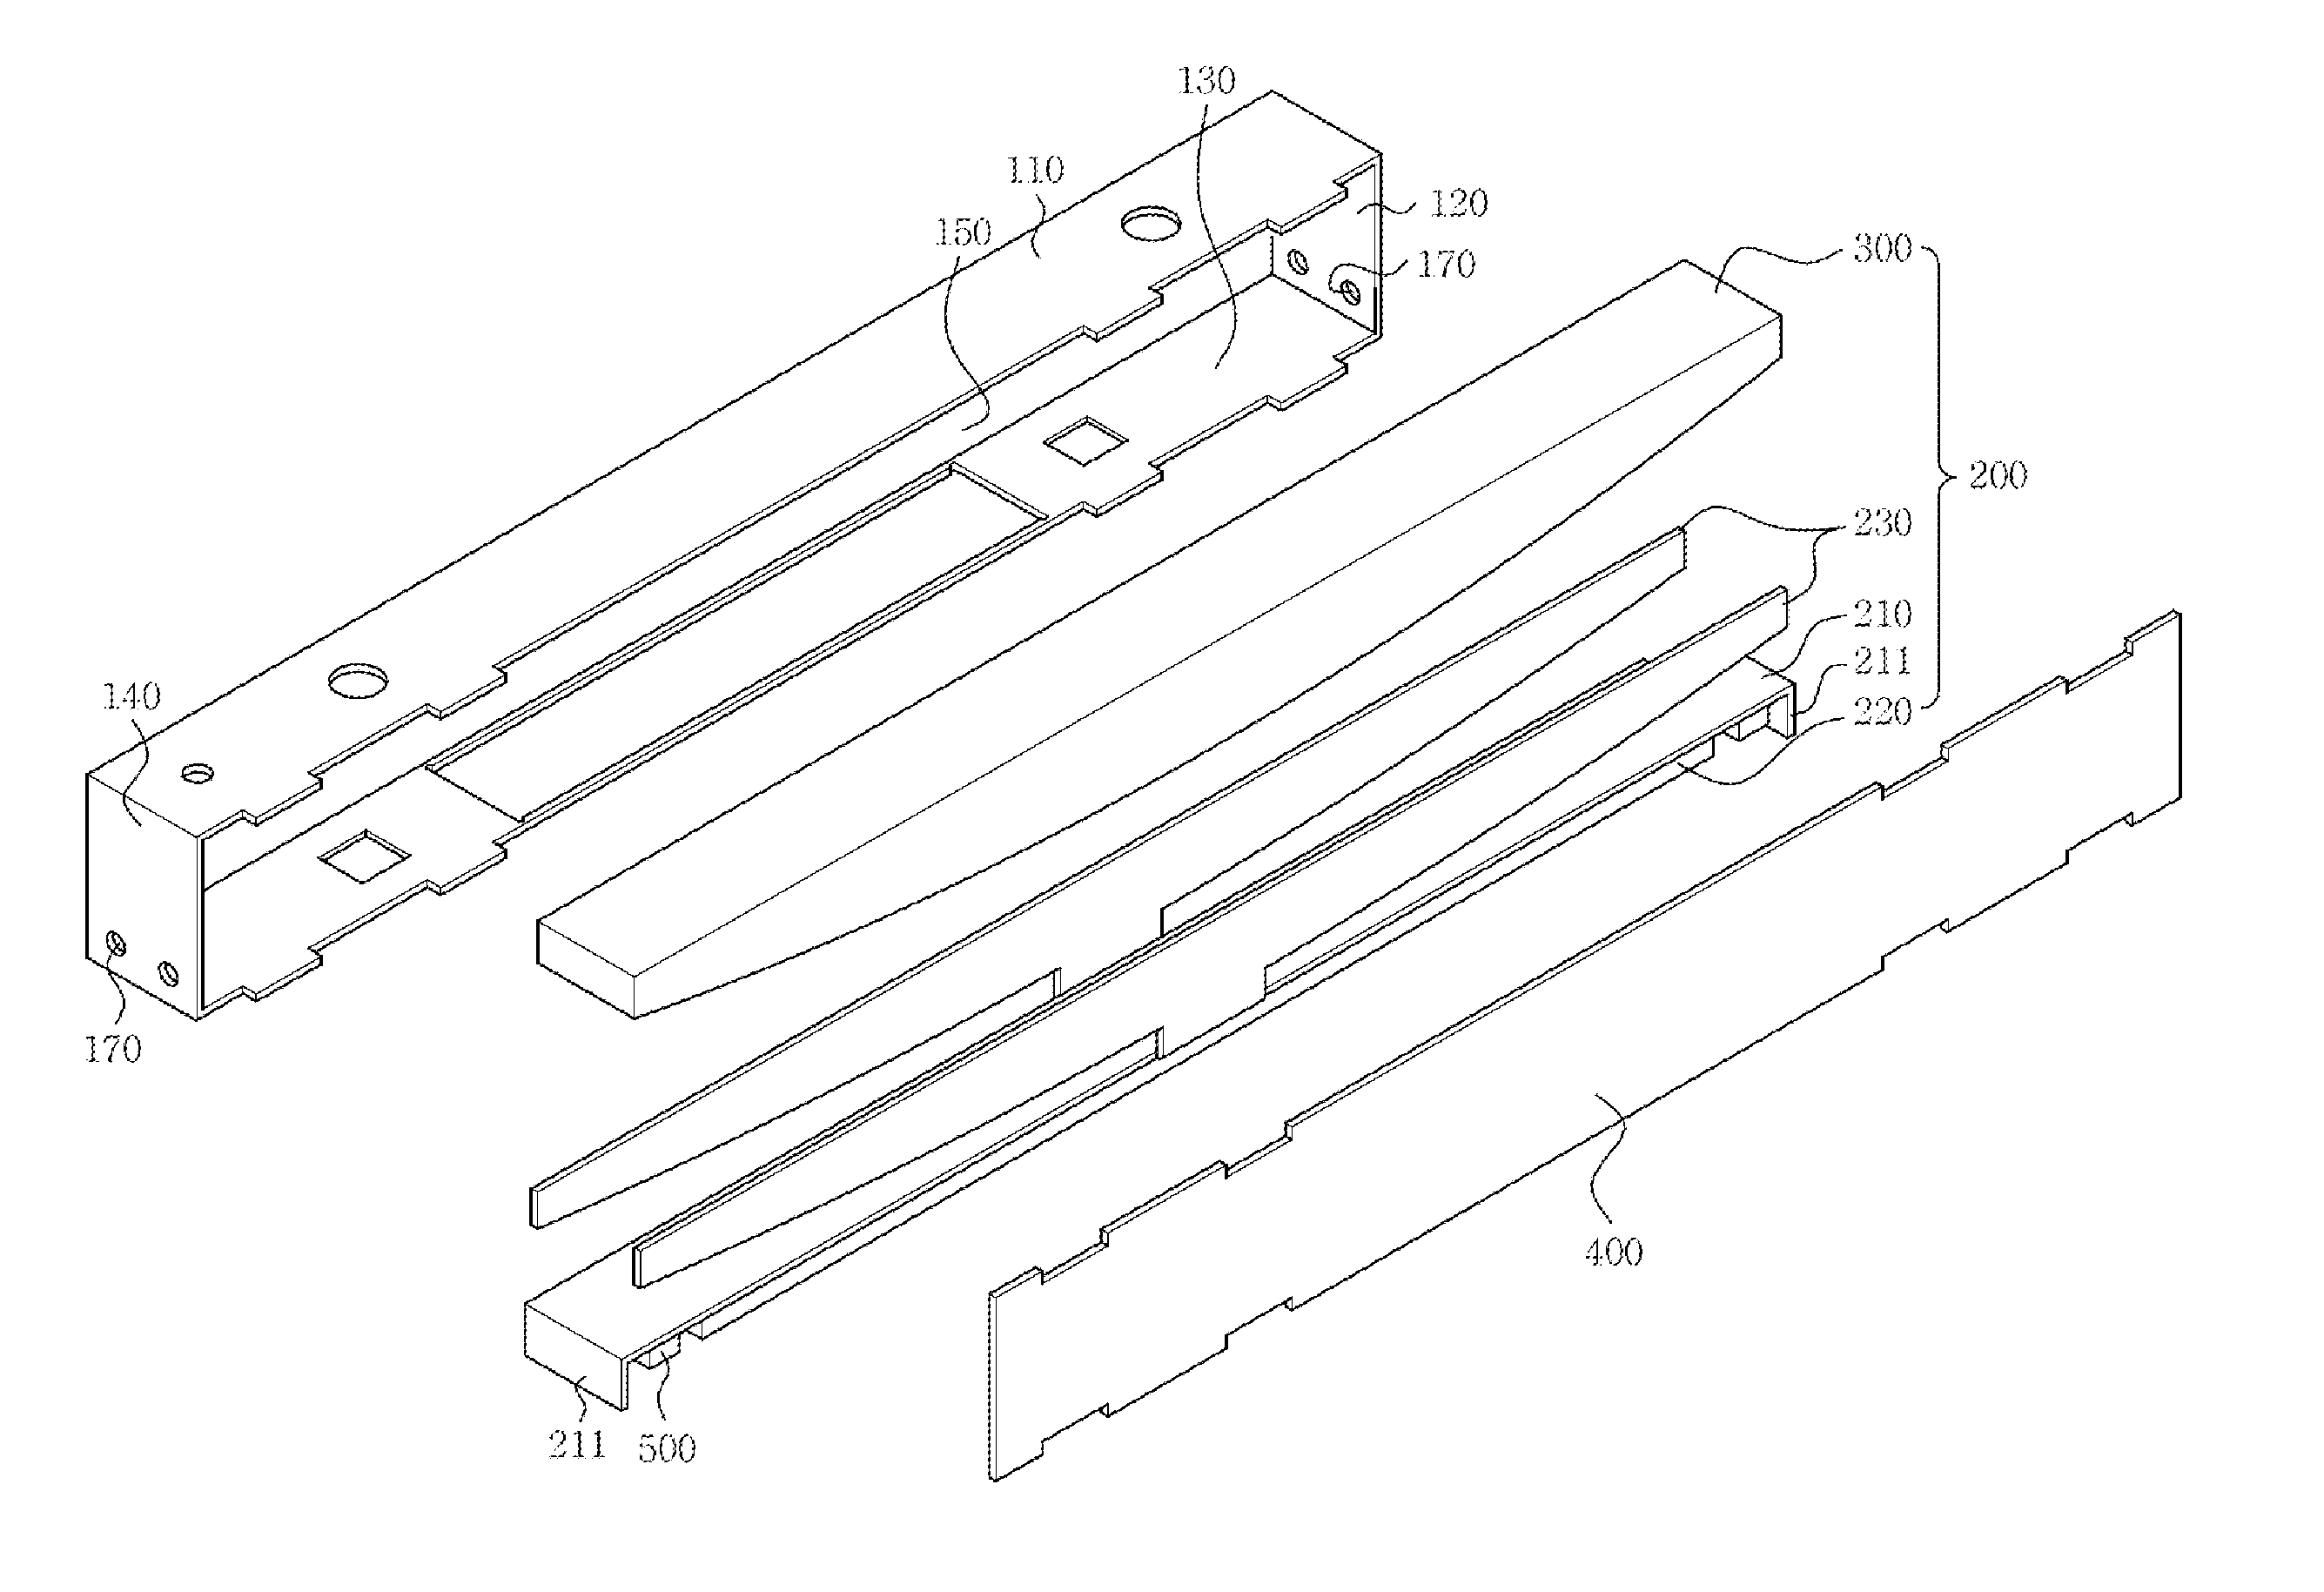 Piezoelectric vibration actuator and method of manufacturing the same